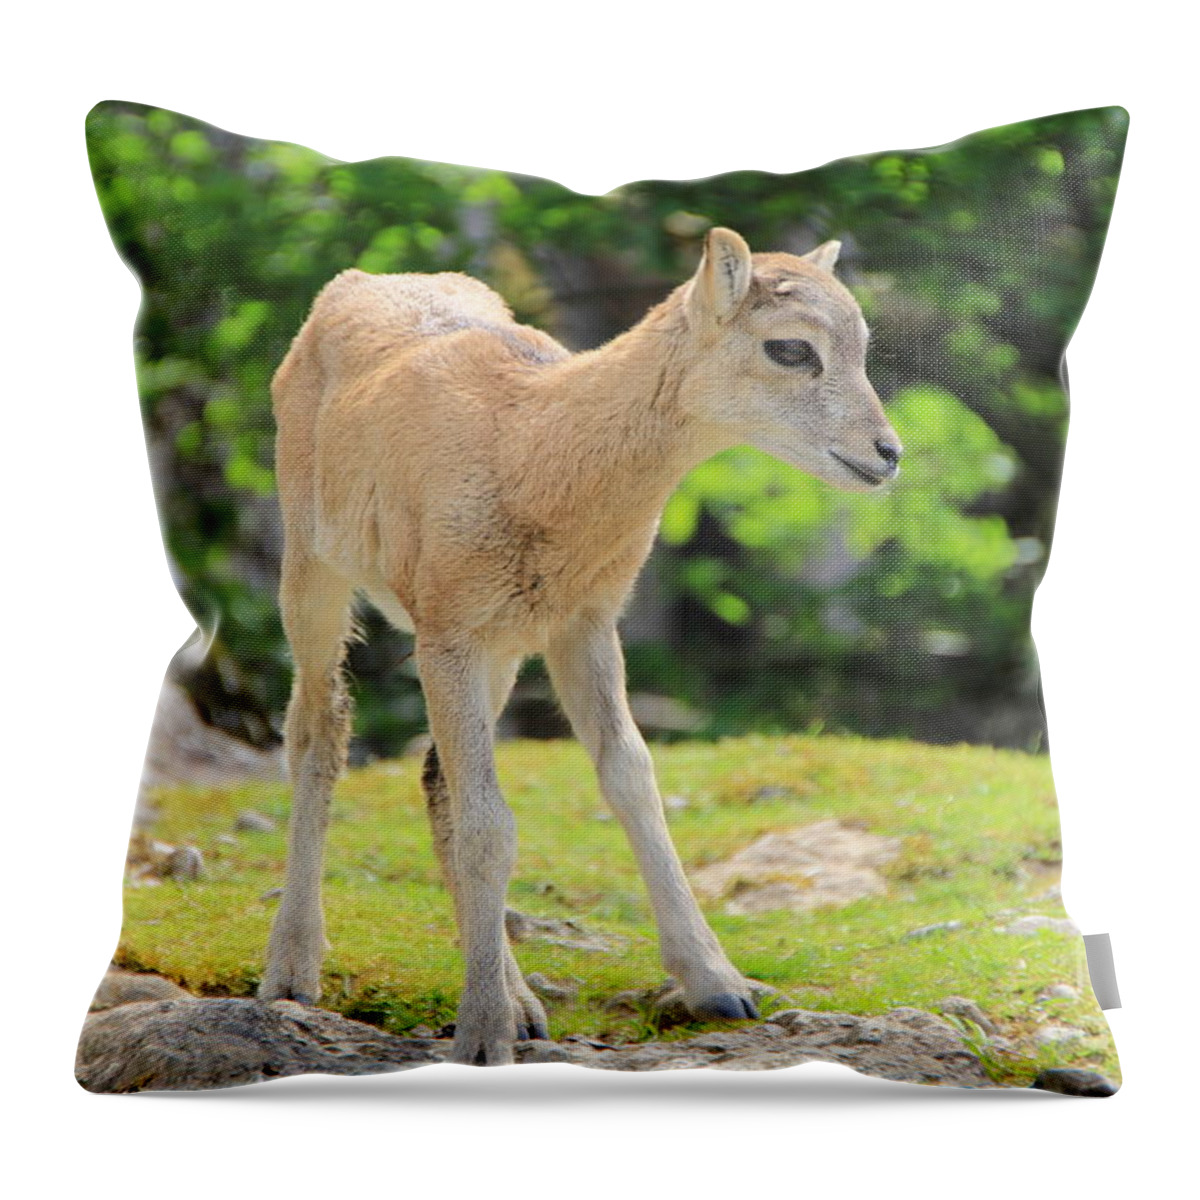 Animal Throw Pillow featuring the photograph Young Goat by Amanda Mohler